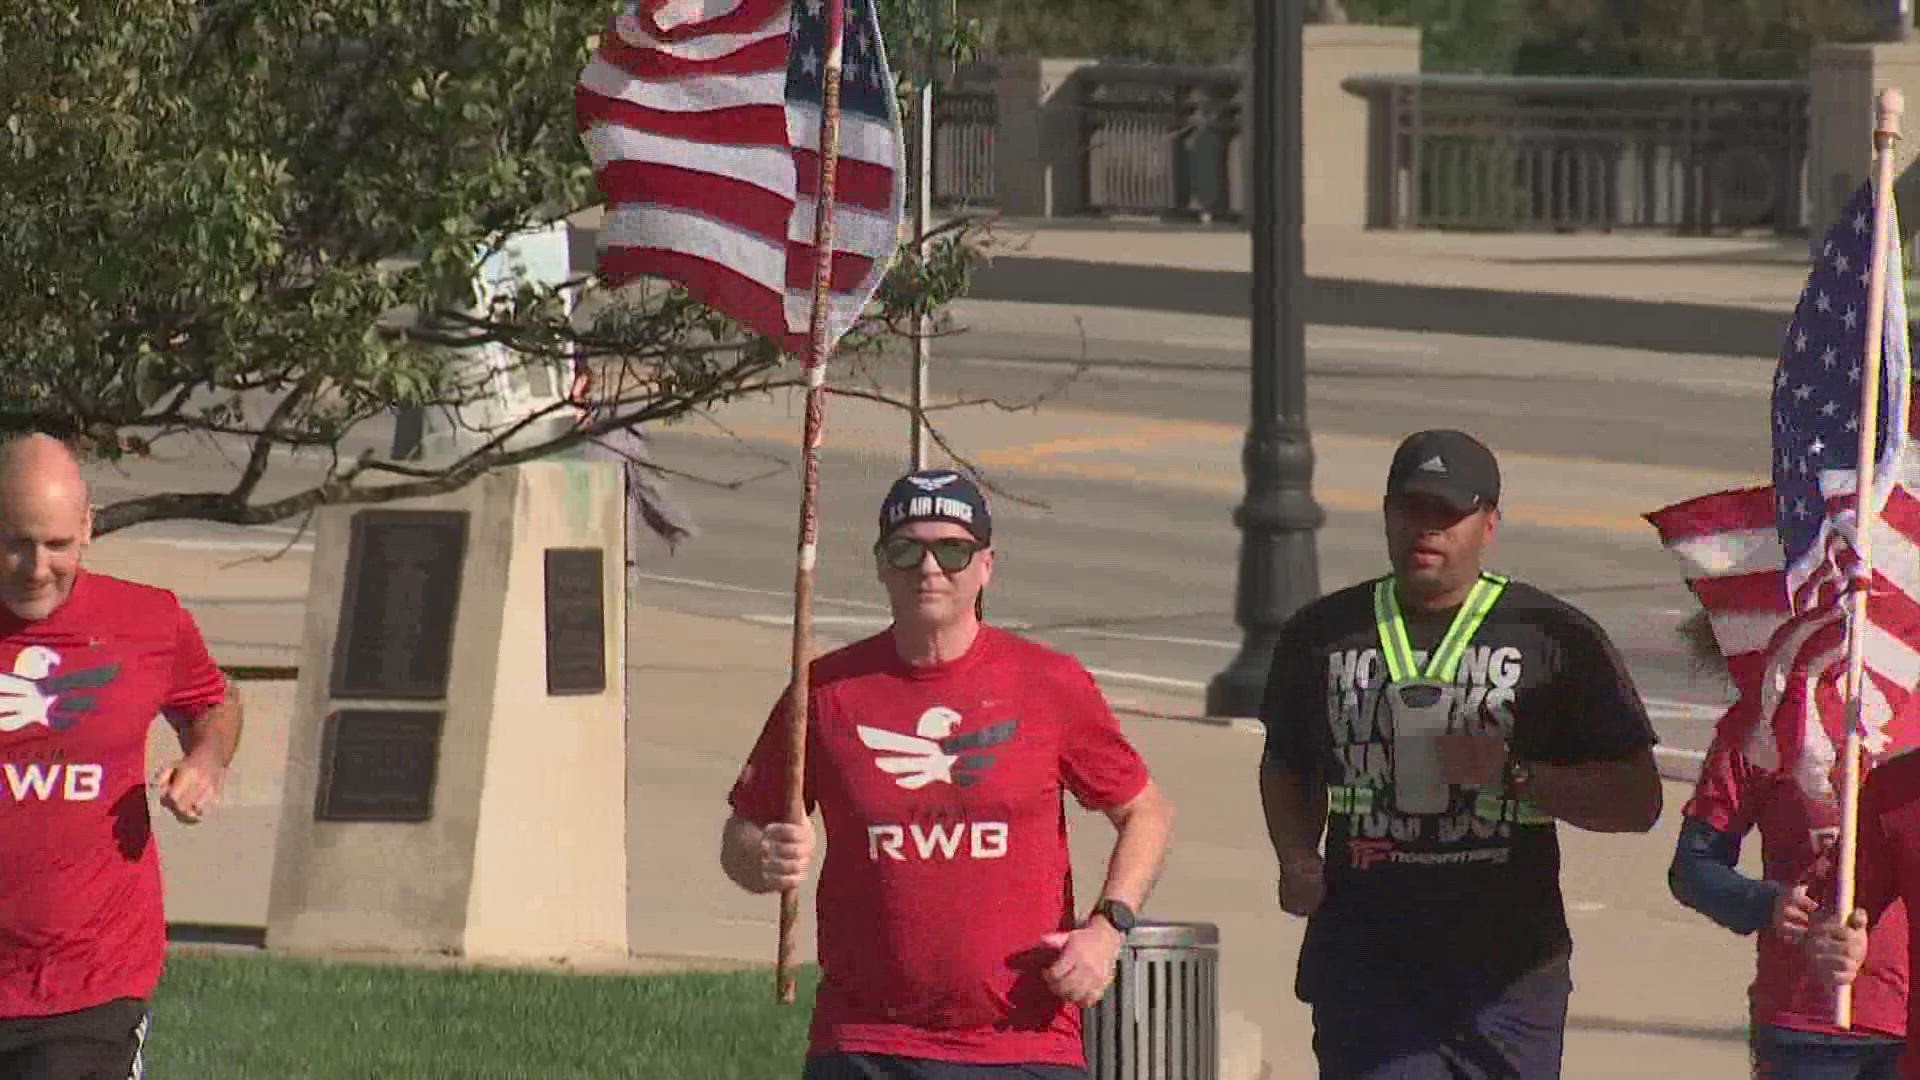 "The relay is a one-flag run on foot
and bicycle across the state, " said Team RWB.